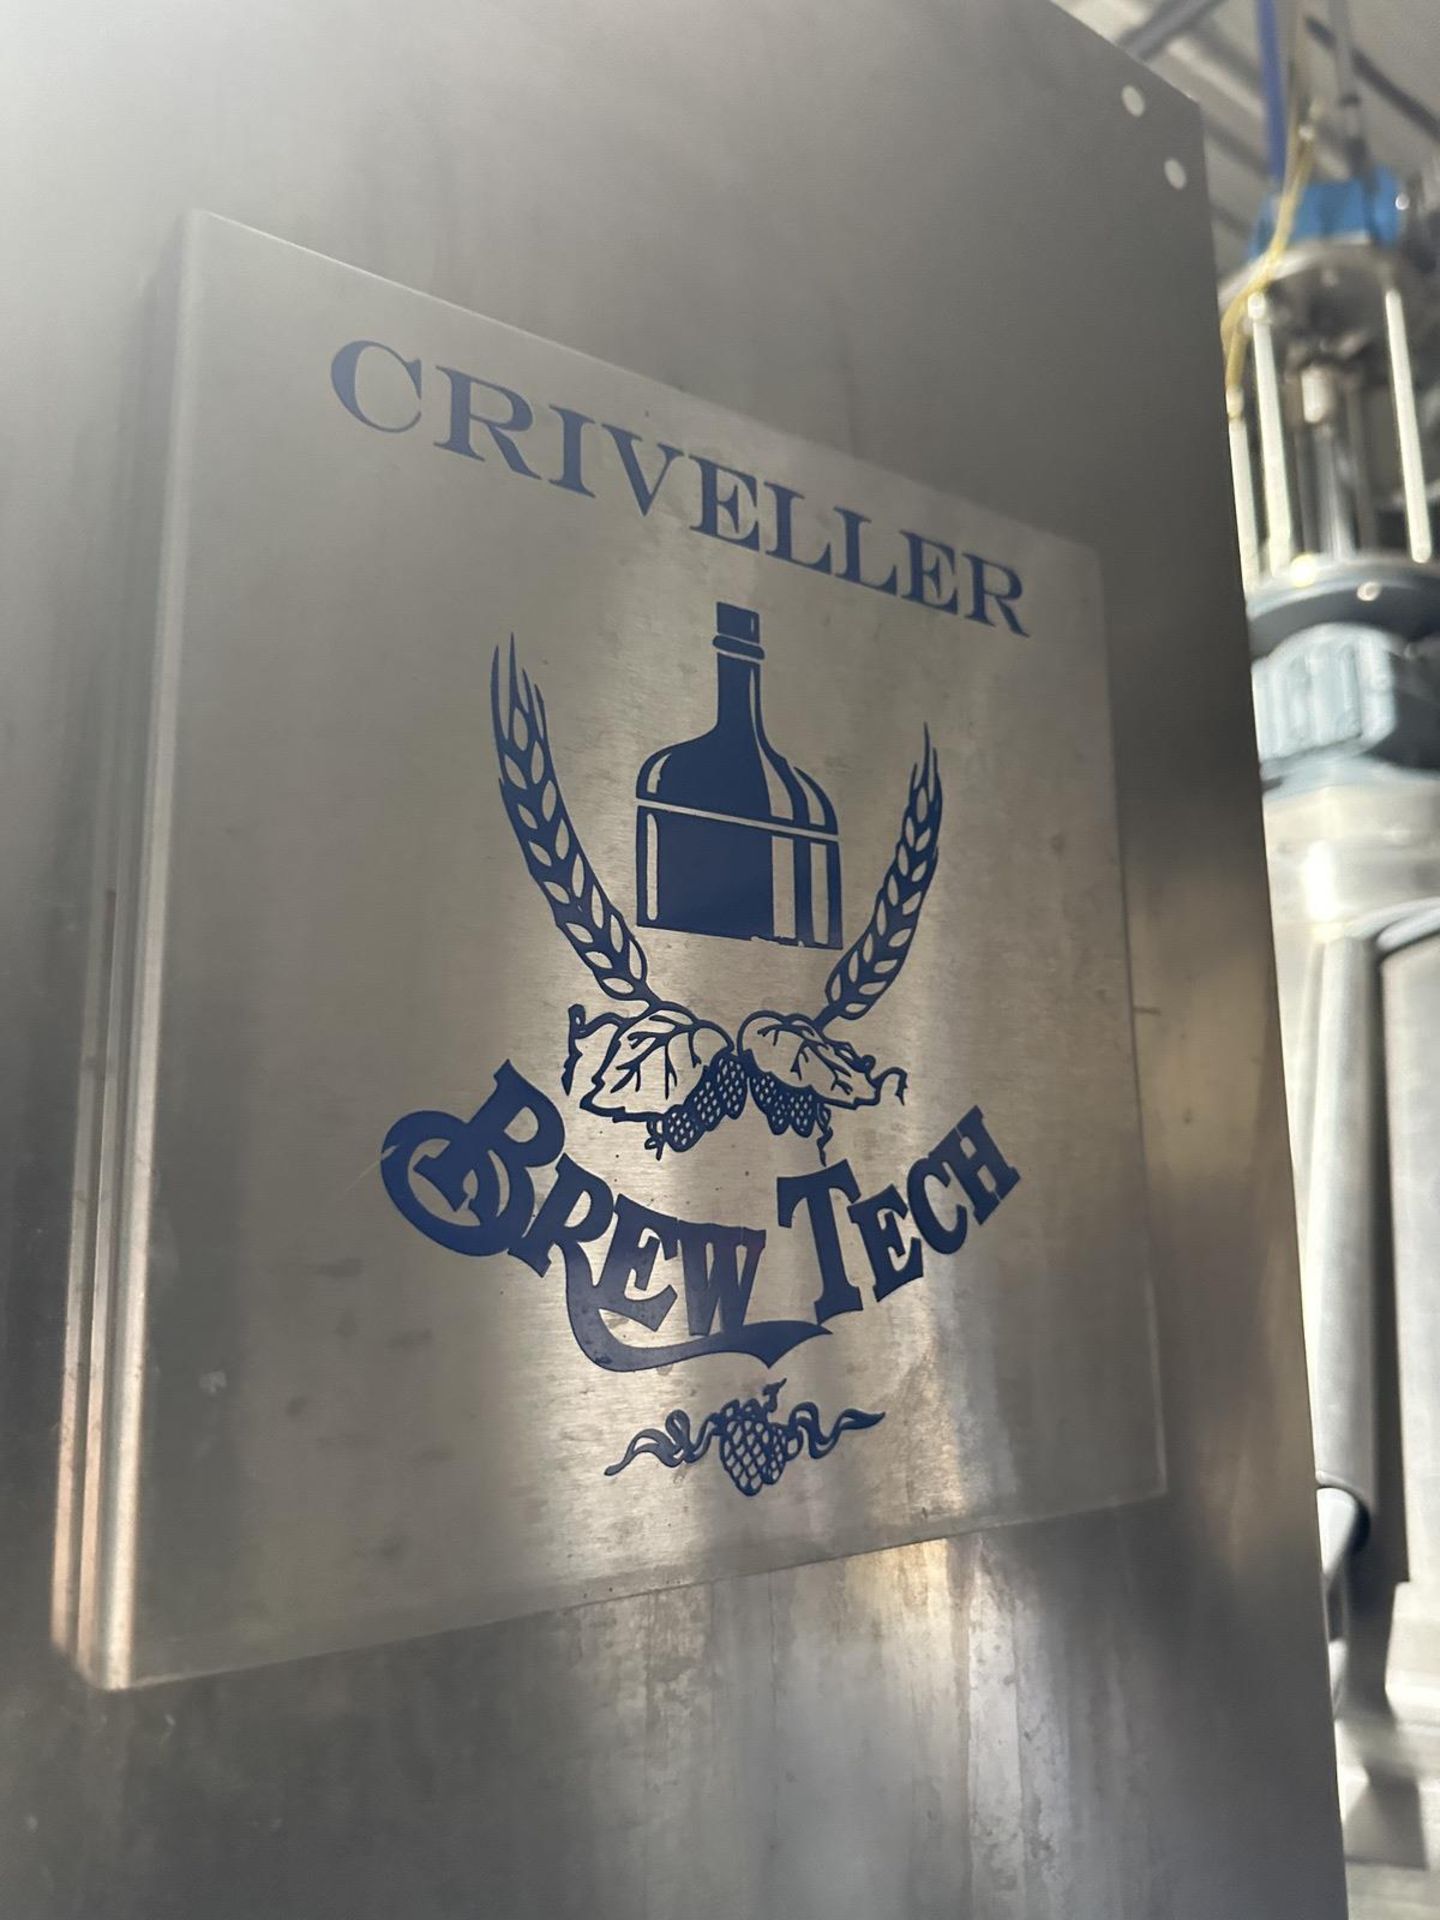 Criveller Brew Tech 30 BBL Brew House w/ 30 BBL Steam Jacketed Brew Kettle & Mash T | Rig Fee $1500 - Image 12 of 18